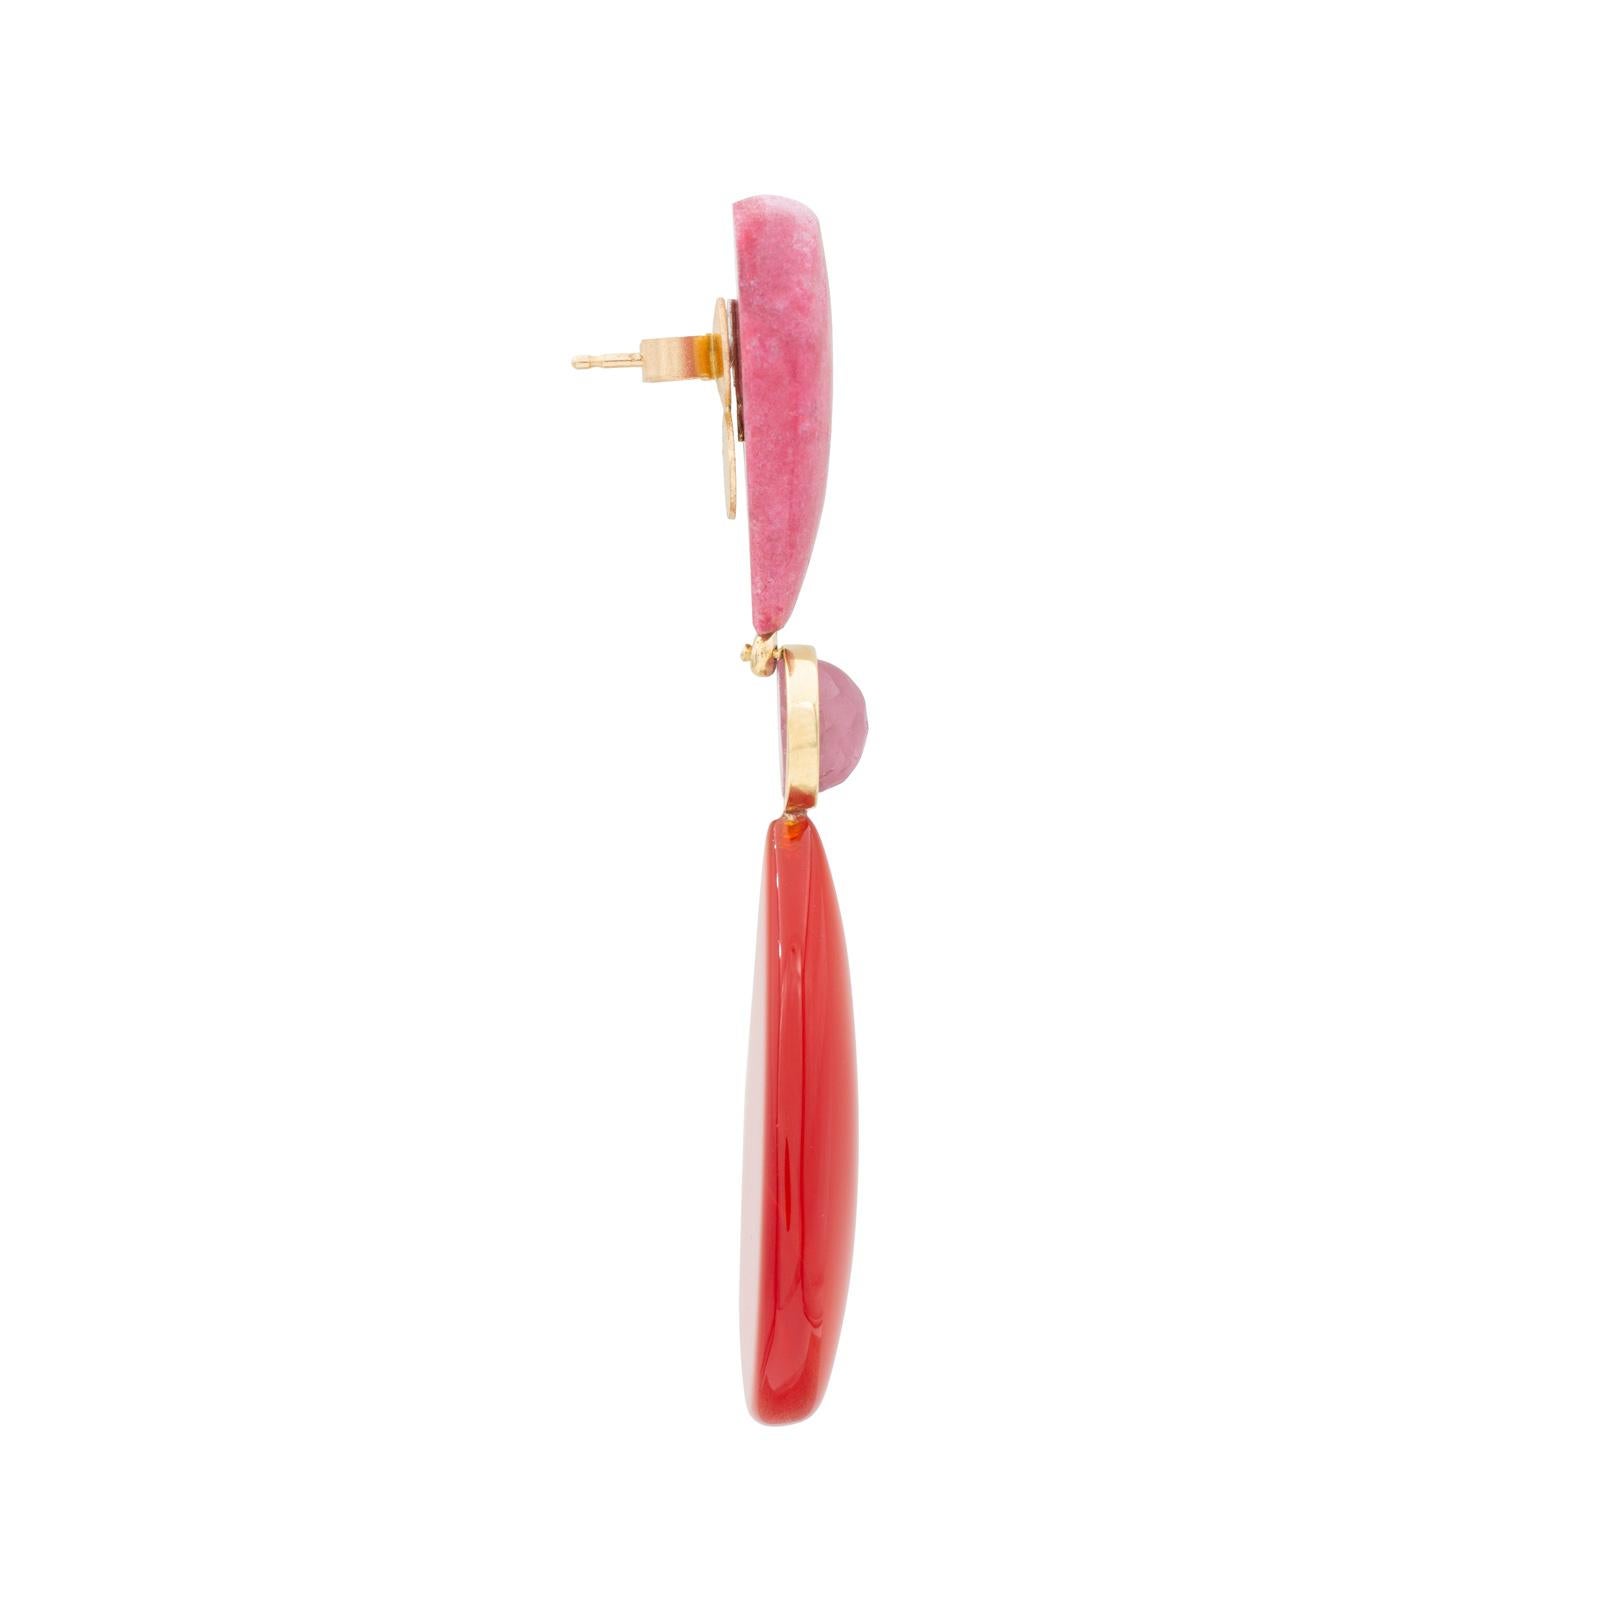 Norwegian Thulite sit atop satin finished Pink Tourmaline, bezel set in polished 18 carat recycled gold, followed by Indian Cornelian. With opposing shapes these earrings create a harmony of geometric play and balance. Designed by Cresta Bledsoe all